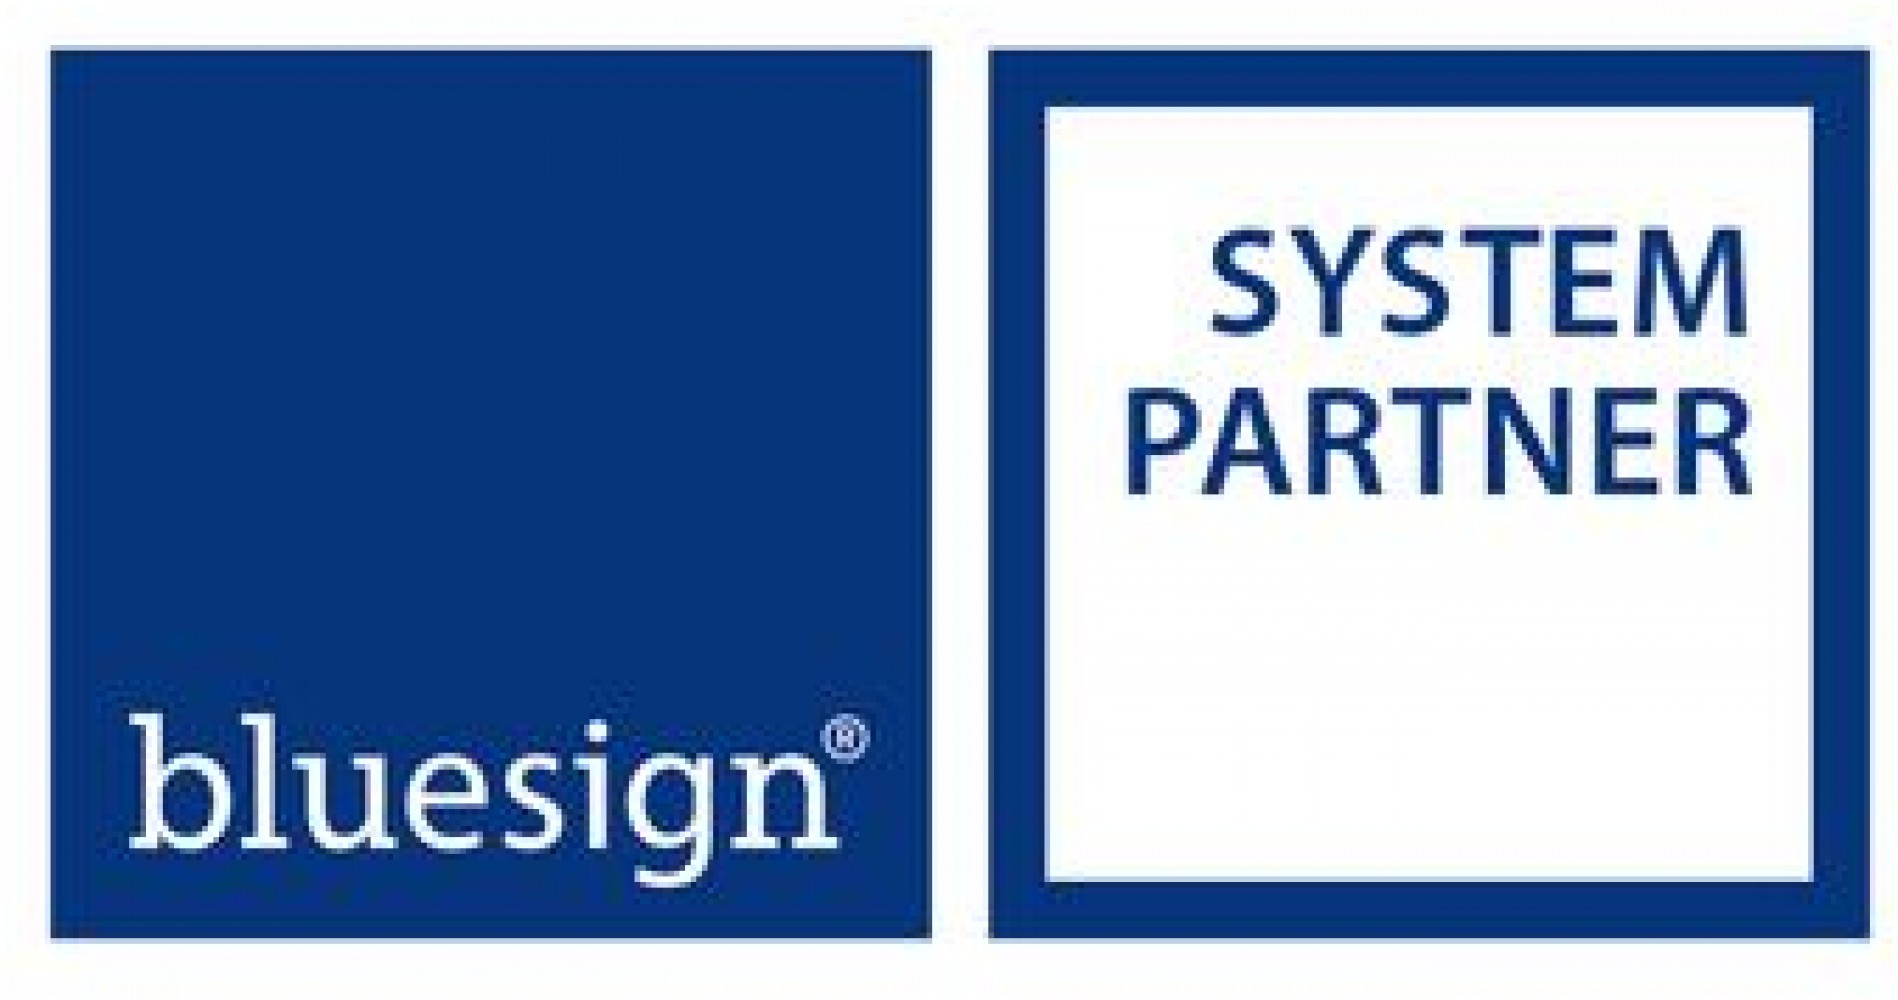 A bluesign systems partner logo in blue and white.